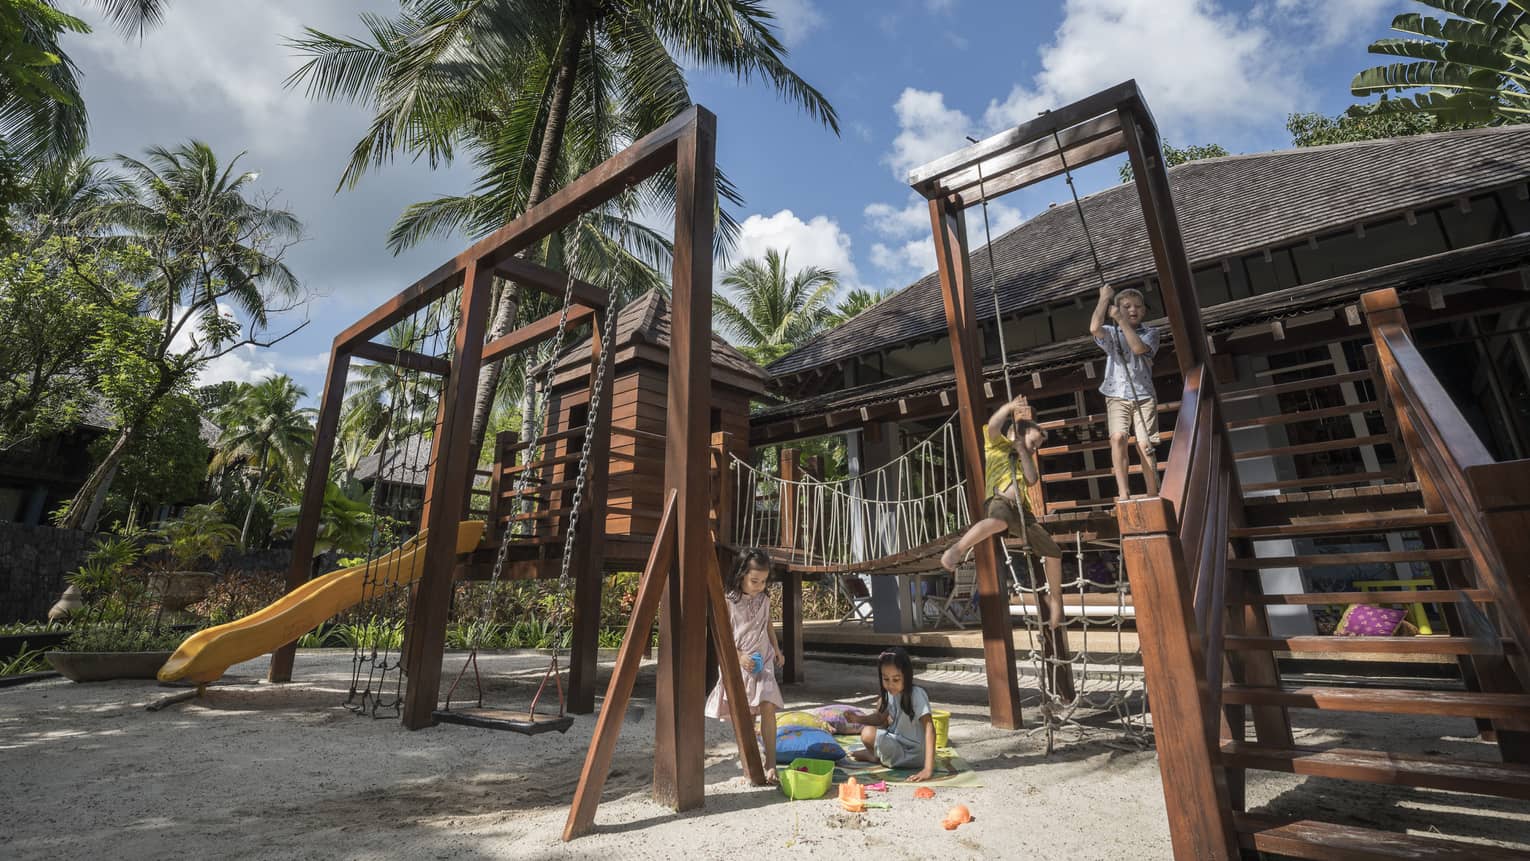 Kids playing on the play set in the kids club at Four Seasons Langkawi